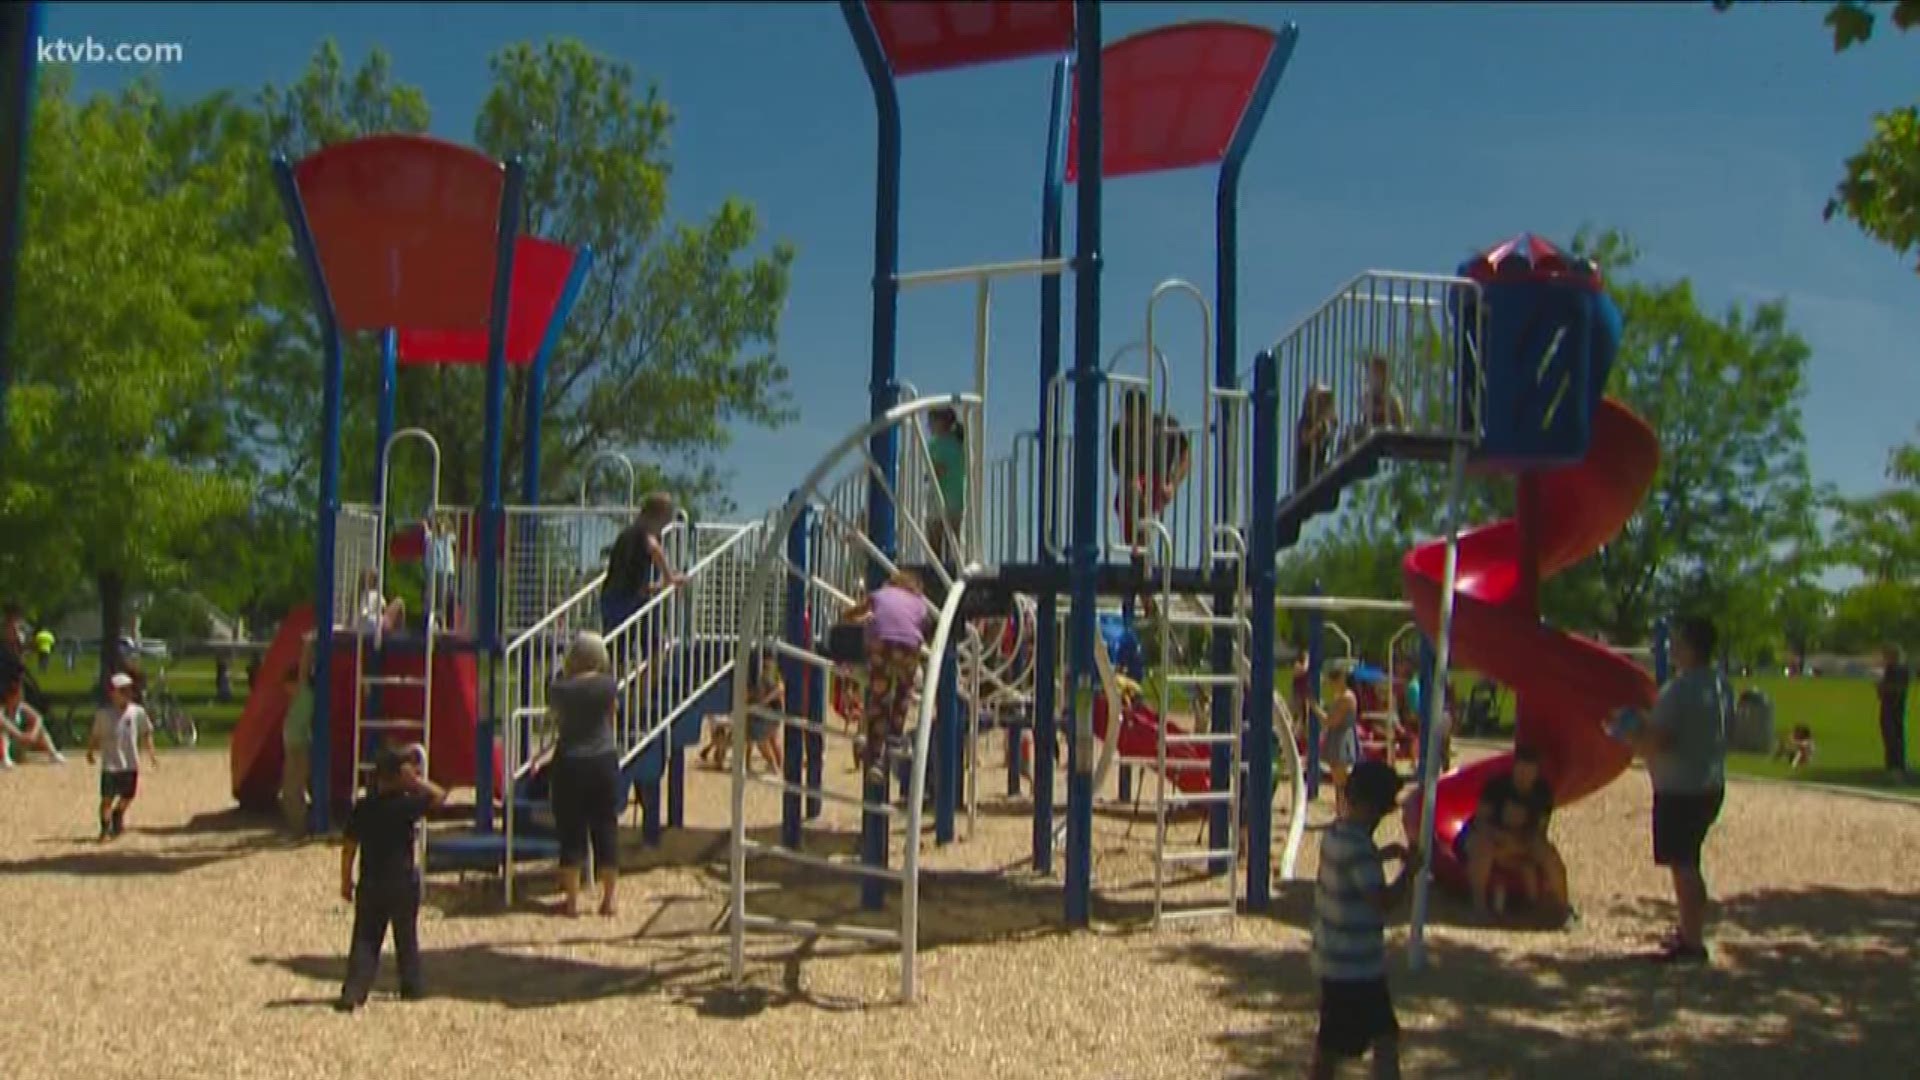 The new playground replaces an outdated one in Liberty Park.